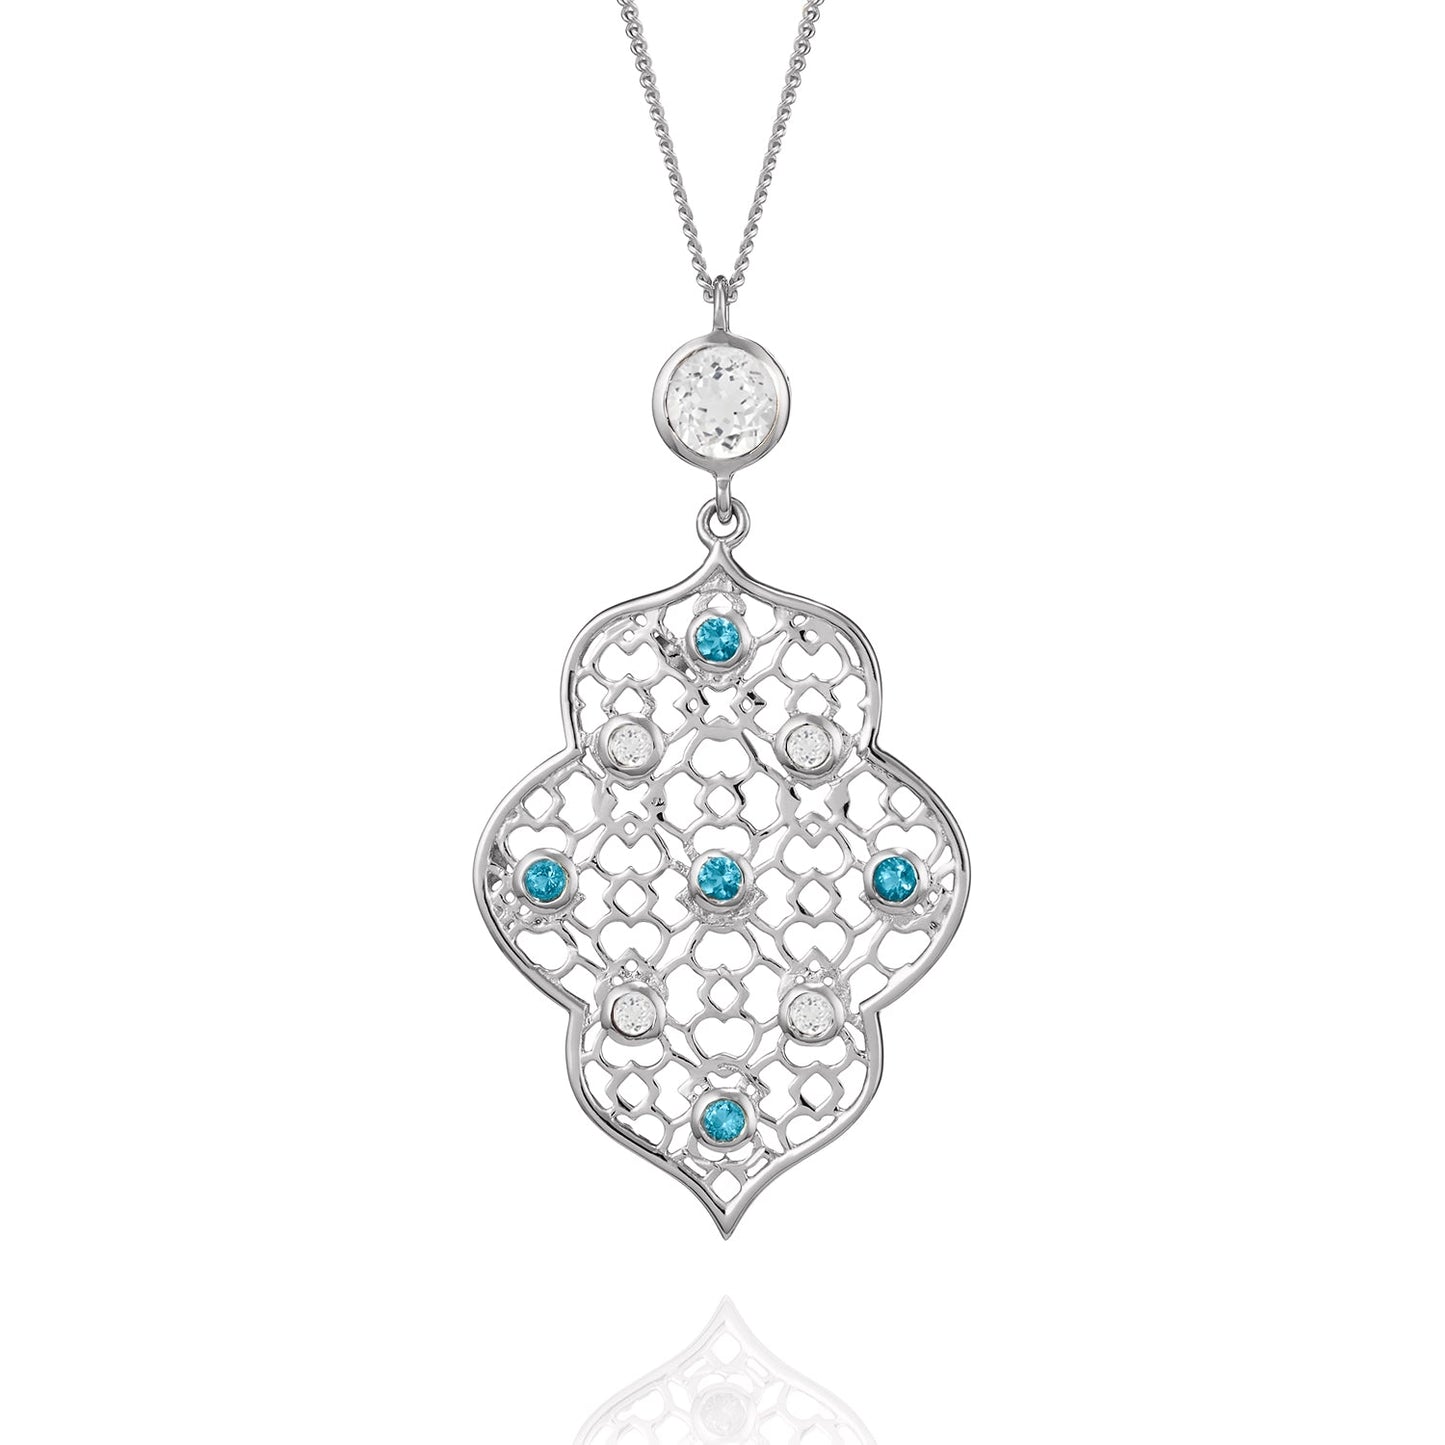 London-made luxury custom gold gemstone jewellery - Silver Filigree Pendant Necklace in White Topaz and Blue Topaz – Andalusian Collection, Augustine Jewellery, British Jewellers, Gemstone Jewellery, Luxury Jewellery London.